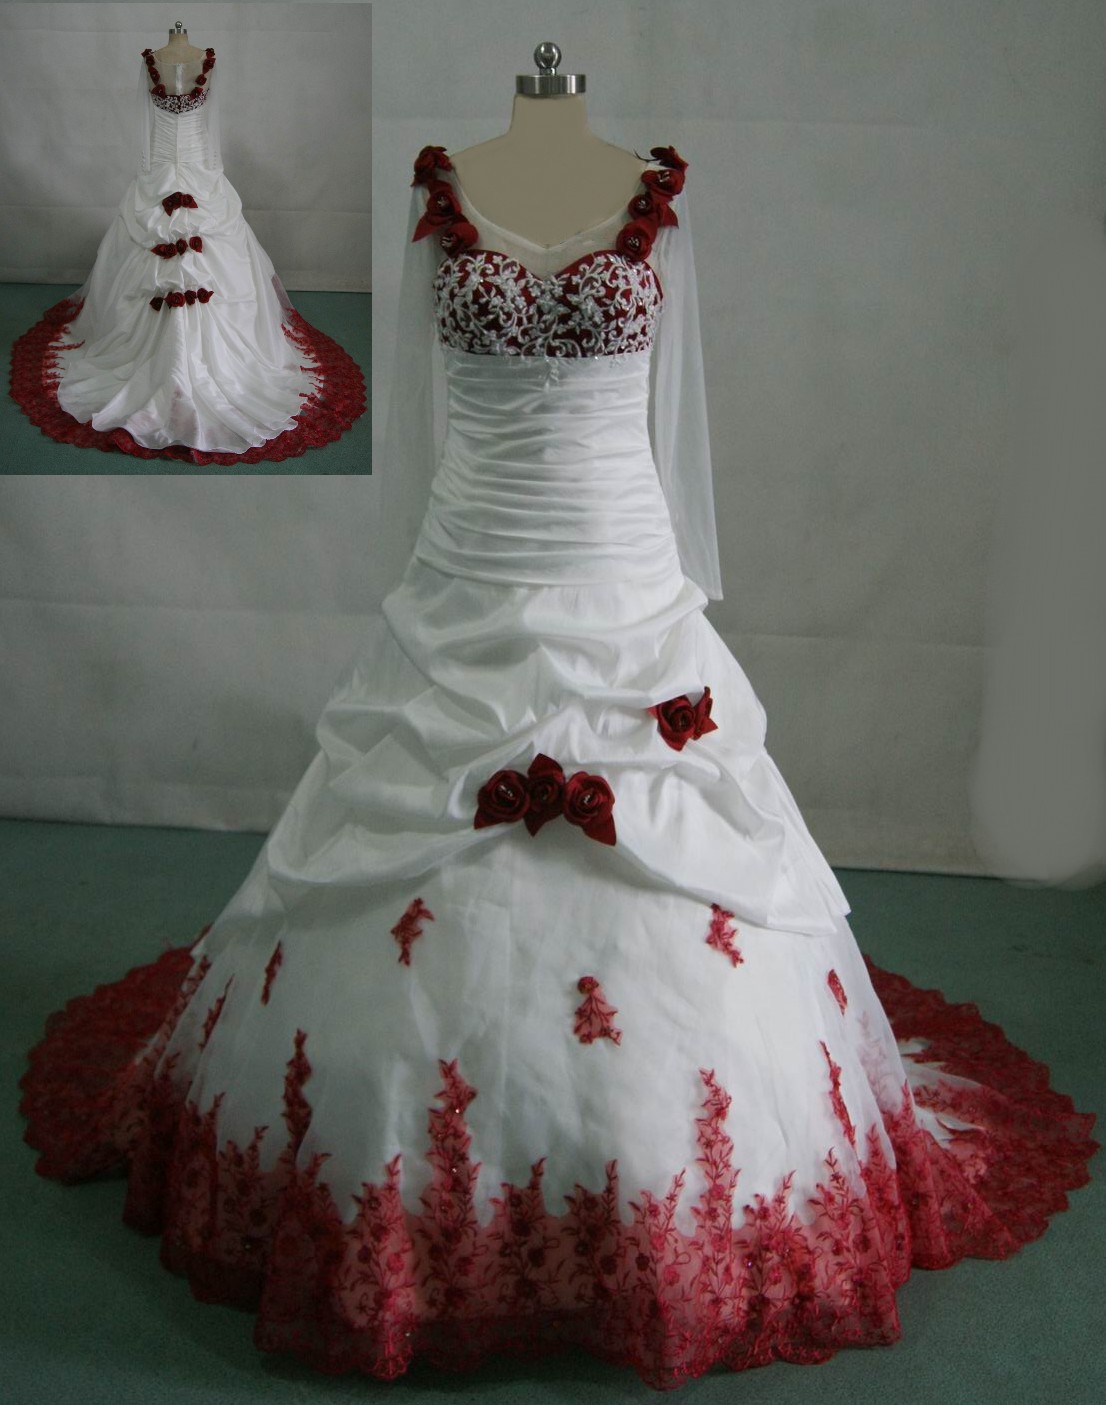 White wedding gown with red roses on the dress